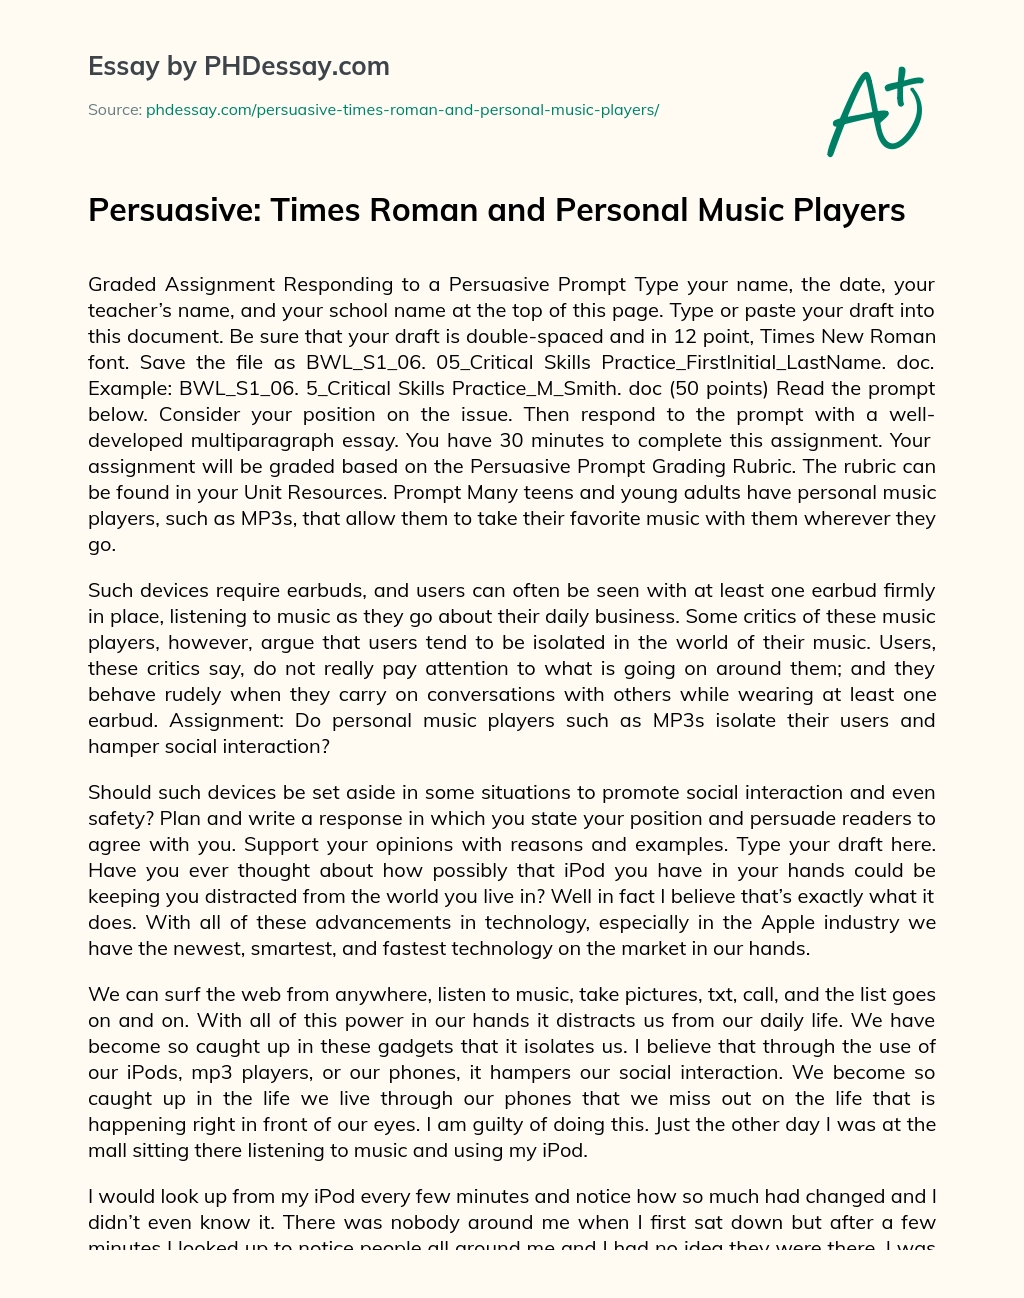 Persuasive: Times Roman and Personal Music Players essay